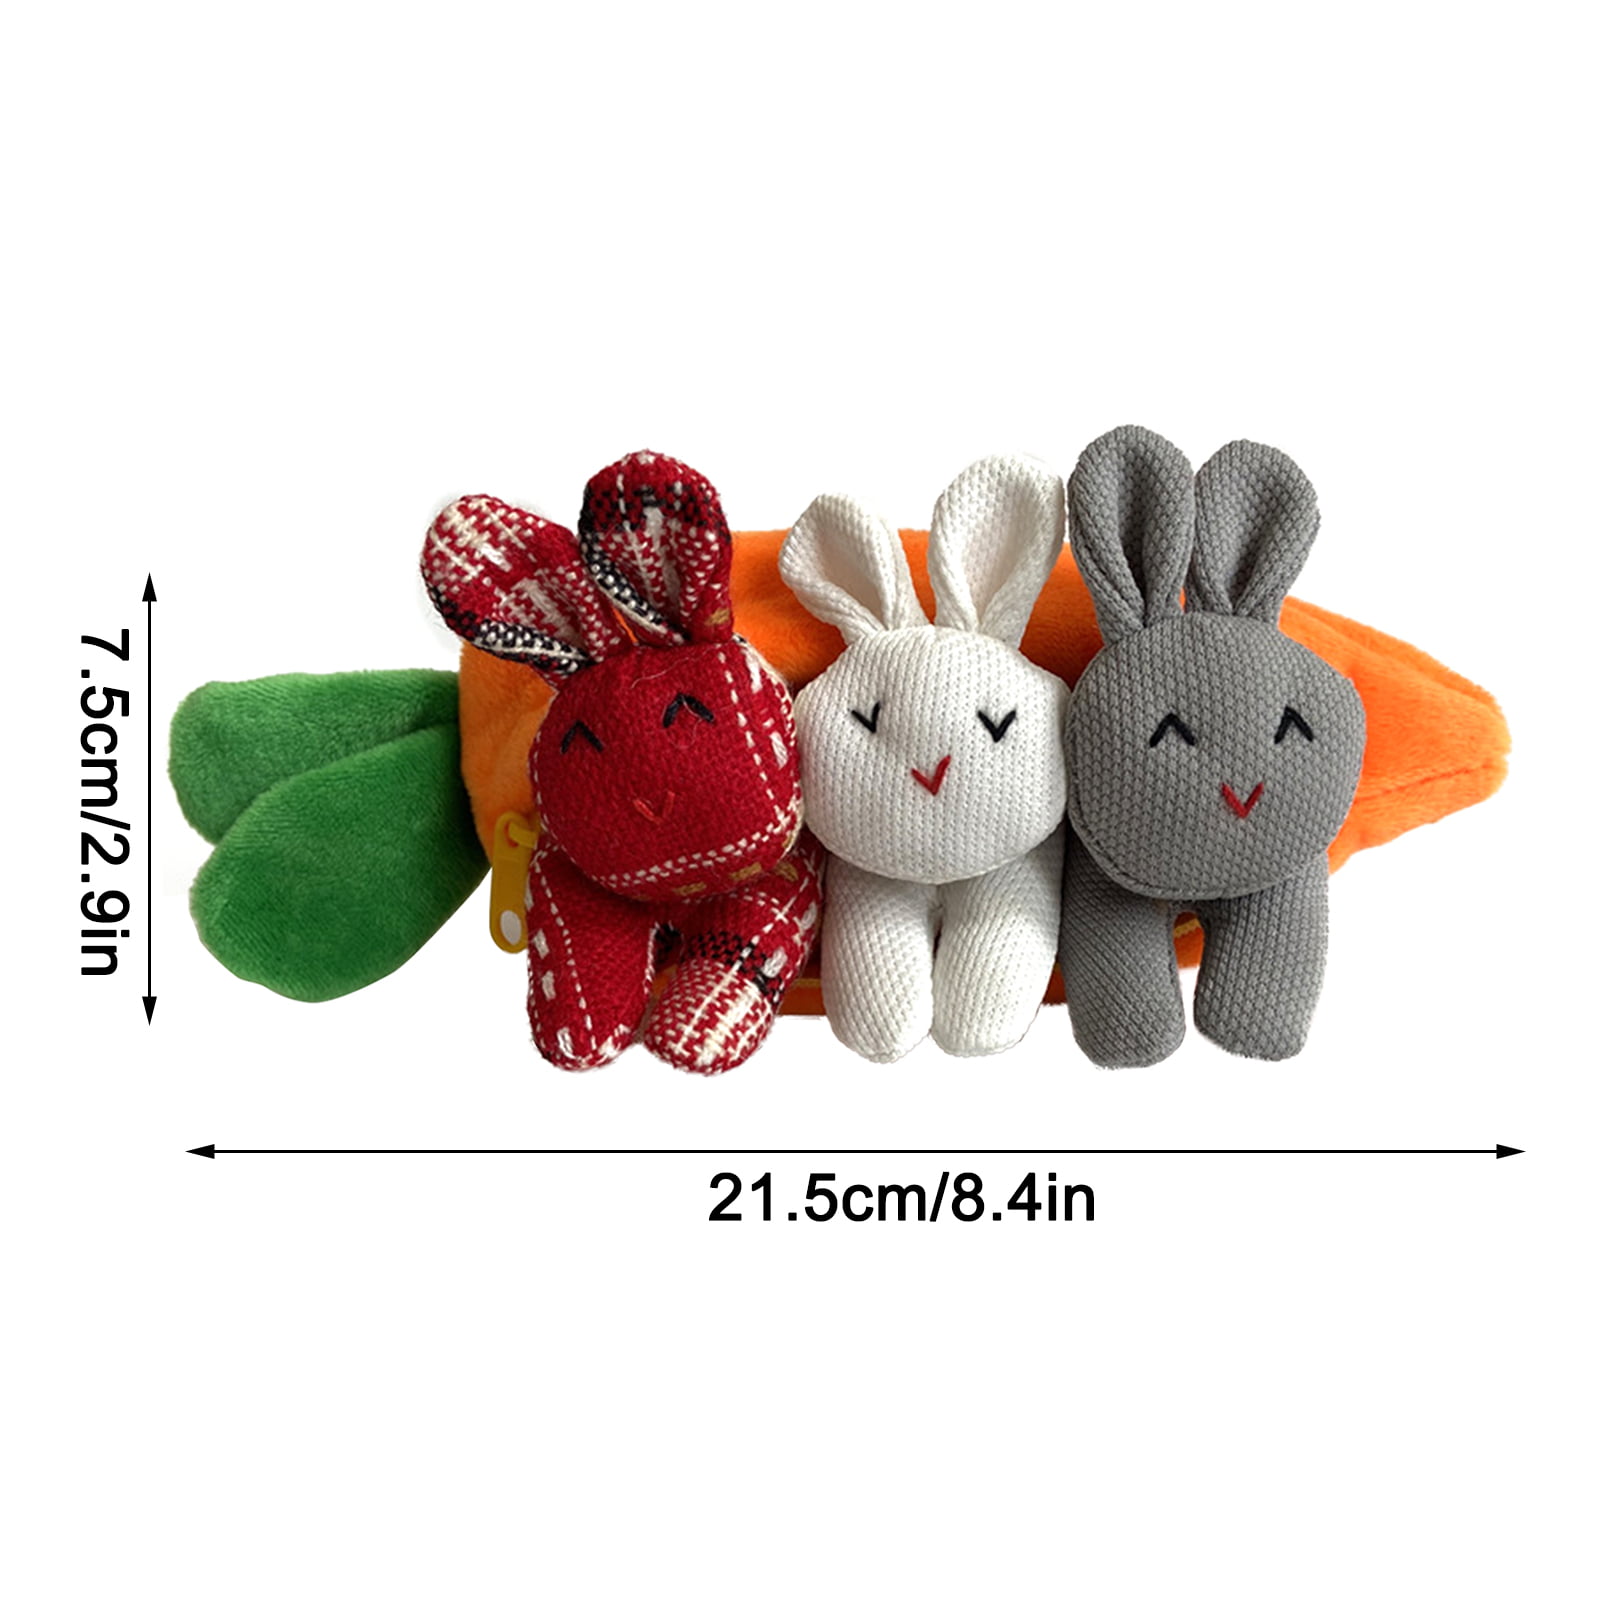  Moanyt 3 Bunnies in Carrot Purse, Easter Bunny Coin Purse,  Desktop Decoration with Cute Rabbit Easter Coin Pouch Gift, Animal Purse  Coin Holder for Kids Home Holiday : Clothing, Shoes 